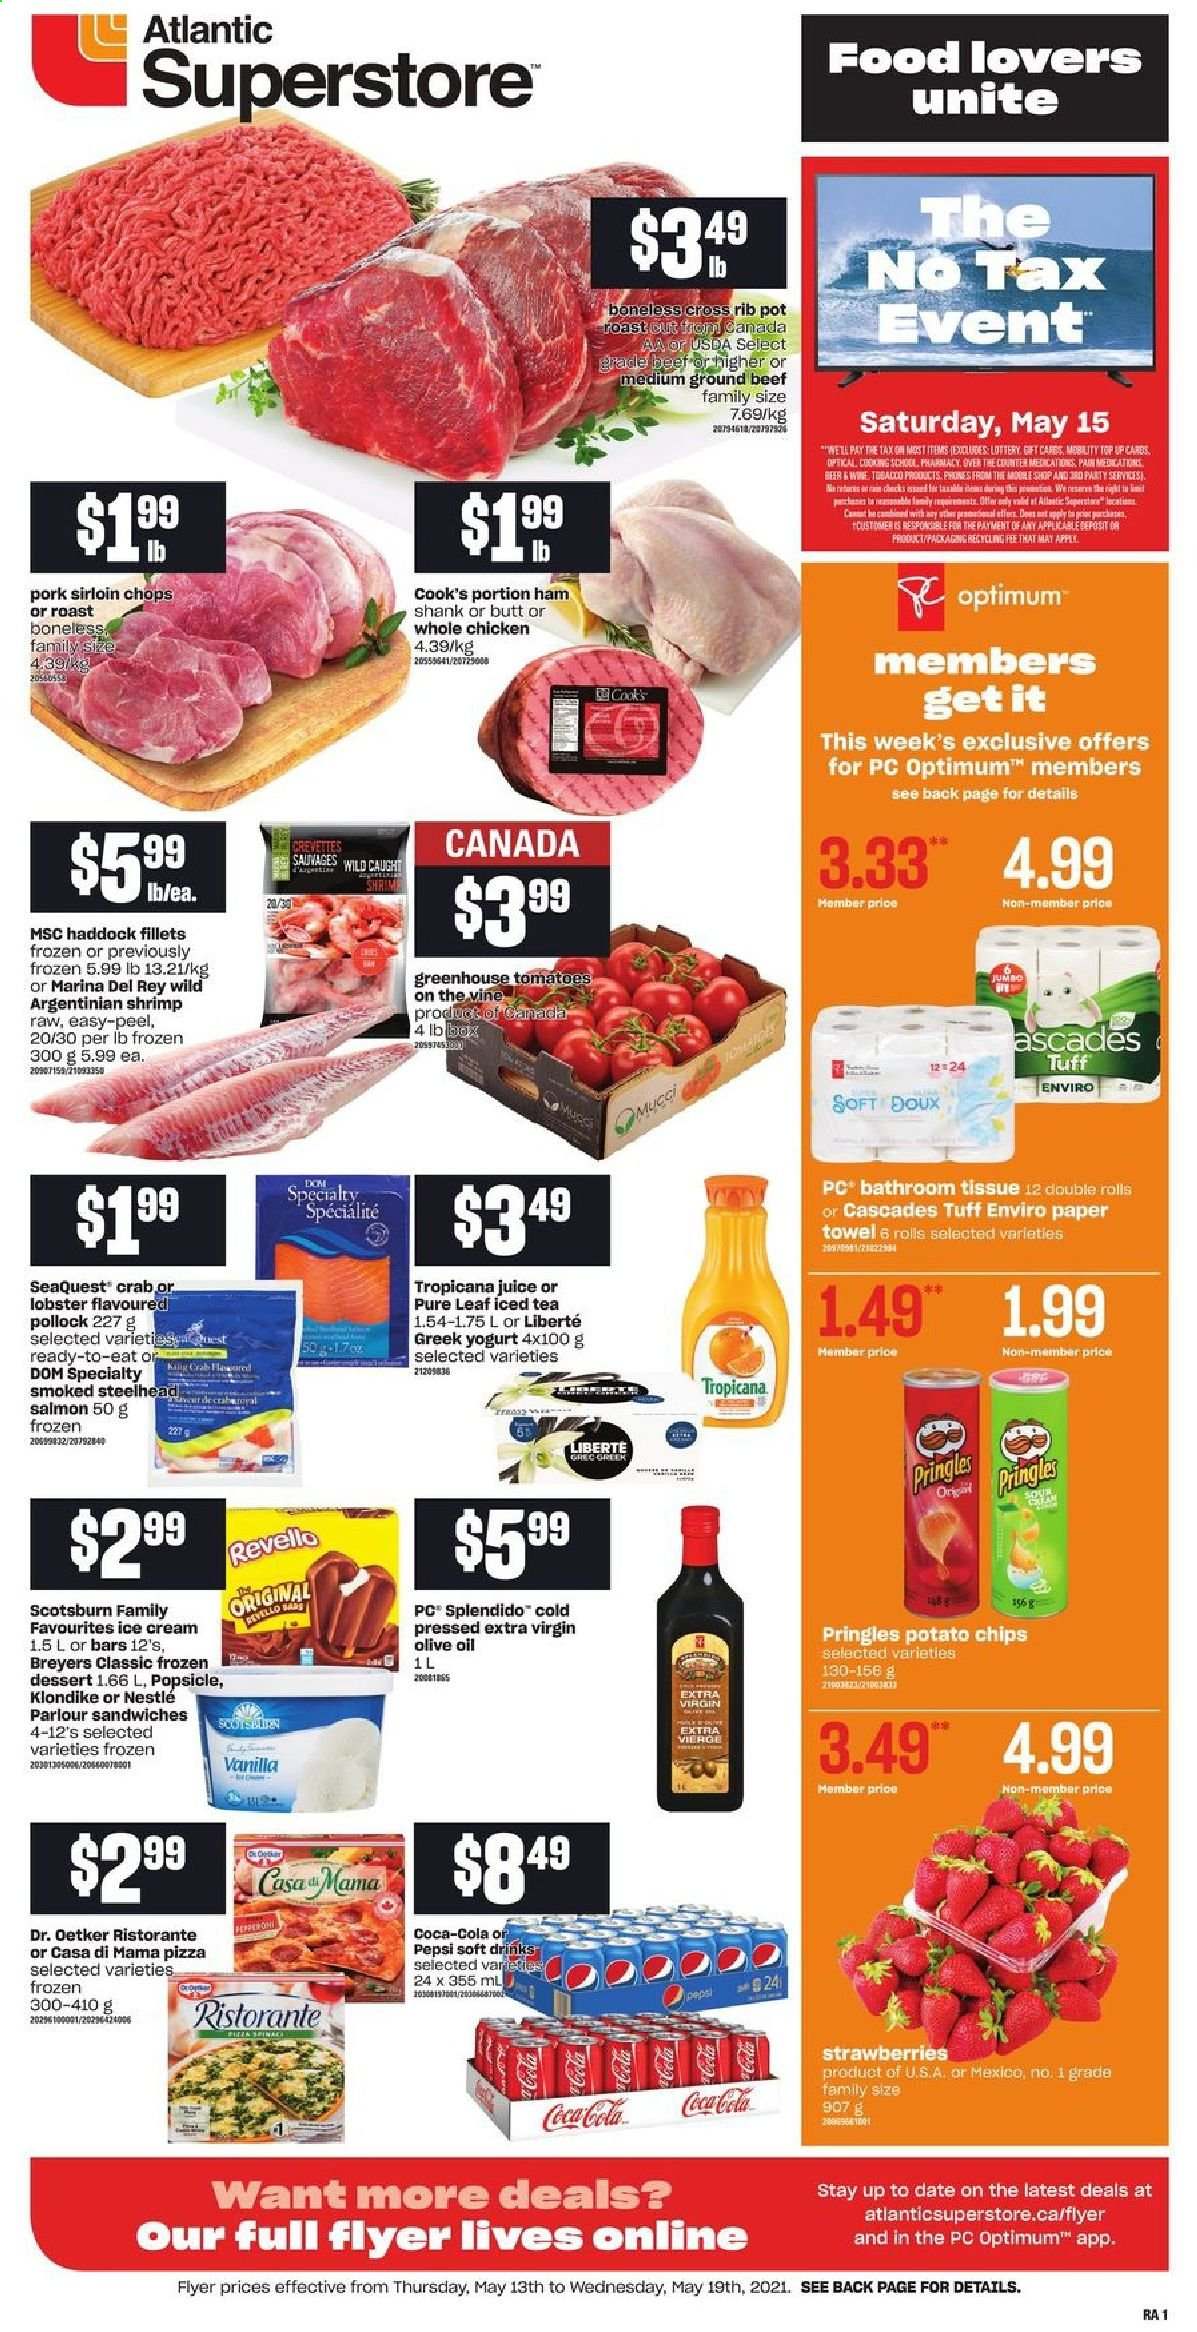 thumbnail - Atlantic Superstore Flyer - May 13, 2021 - May 19, 2021 - Sales products - strawberries, lobster, salmon, haddock, pollock, crab, shrimps, pizza, sandwich, ham, ham shank, Cook's, Dr. Oetker, greek yoghurt, yoghurt, ice cream, potato chips, Pringles, extra virgin olive oil, olive oil, oil, Coca-Cola, Pepsi, juice, ice tea, soft drink, Pure Leaf, beer, whole chicken, chicken, beef meat, ground beef, pork loin, bath tissue, paper towels, Optimum, pot, Nestlé. Page 1.